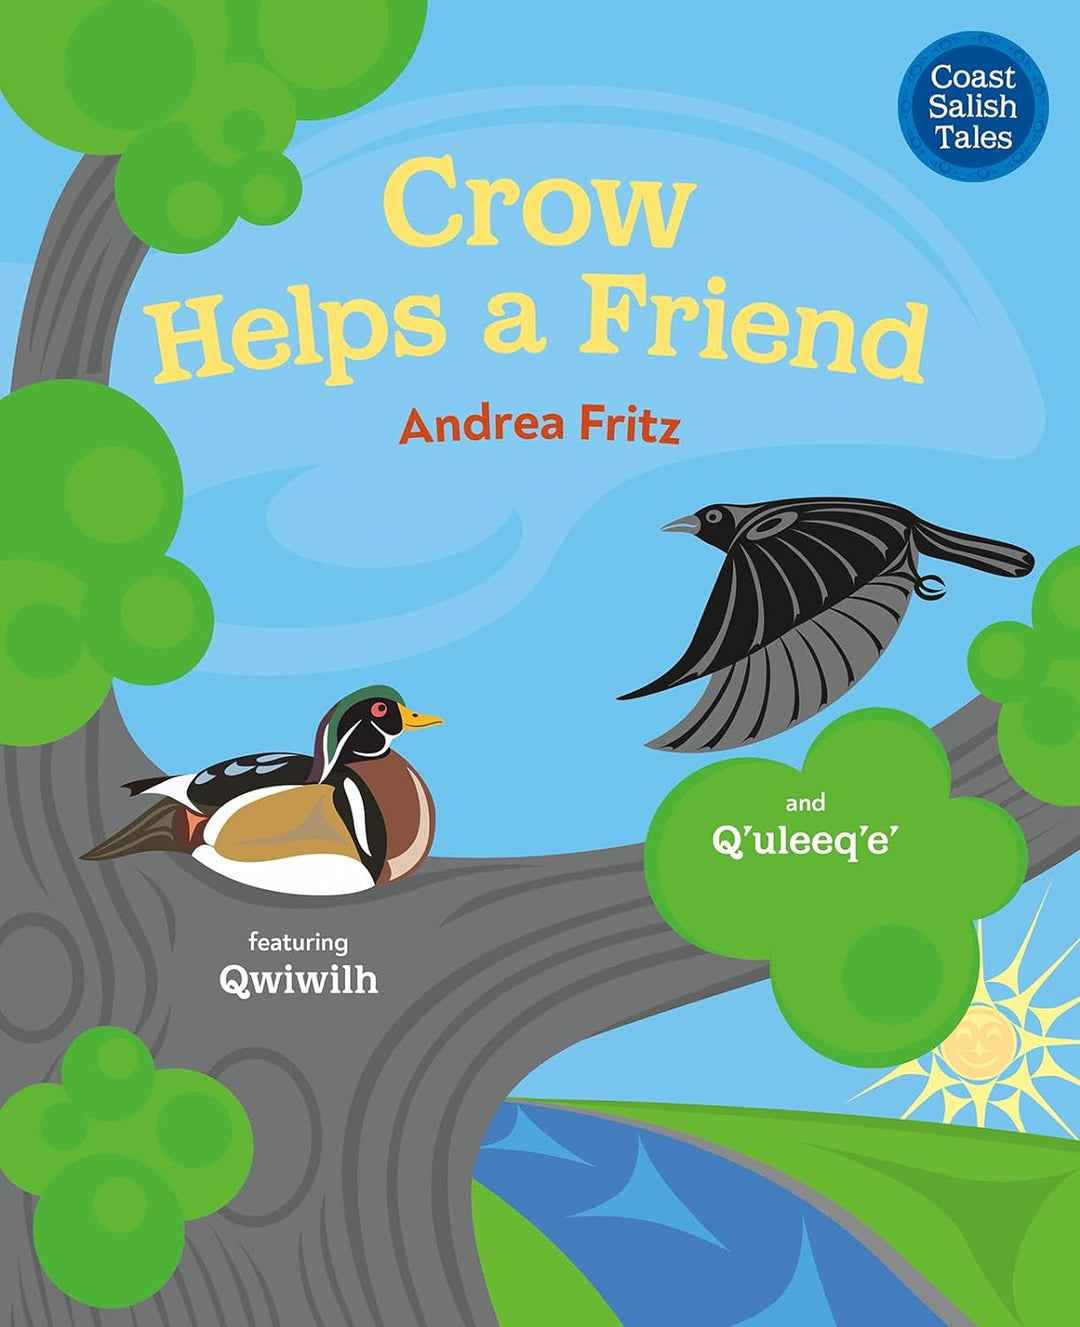 Crow Helps a Friend by Andrea Fritz